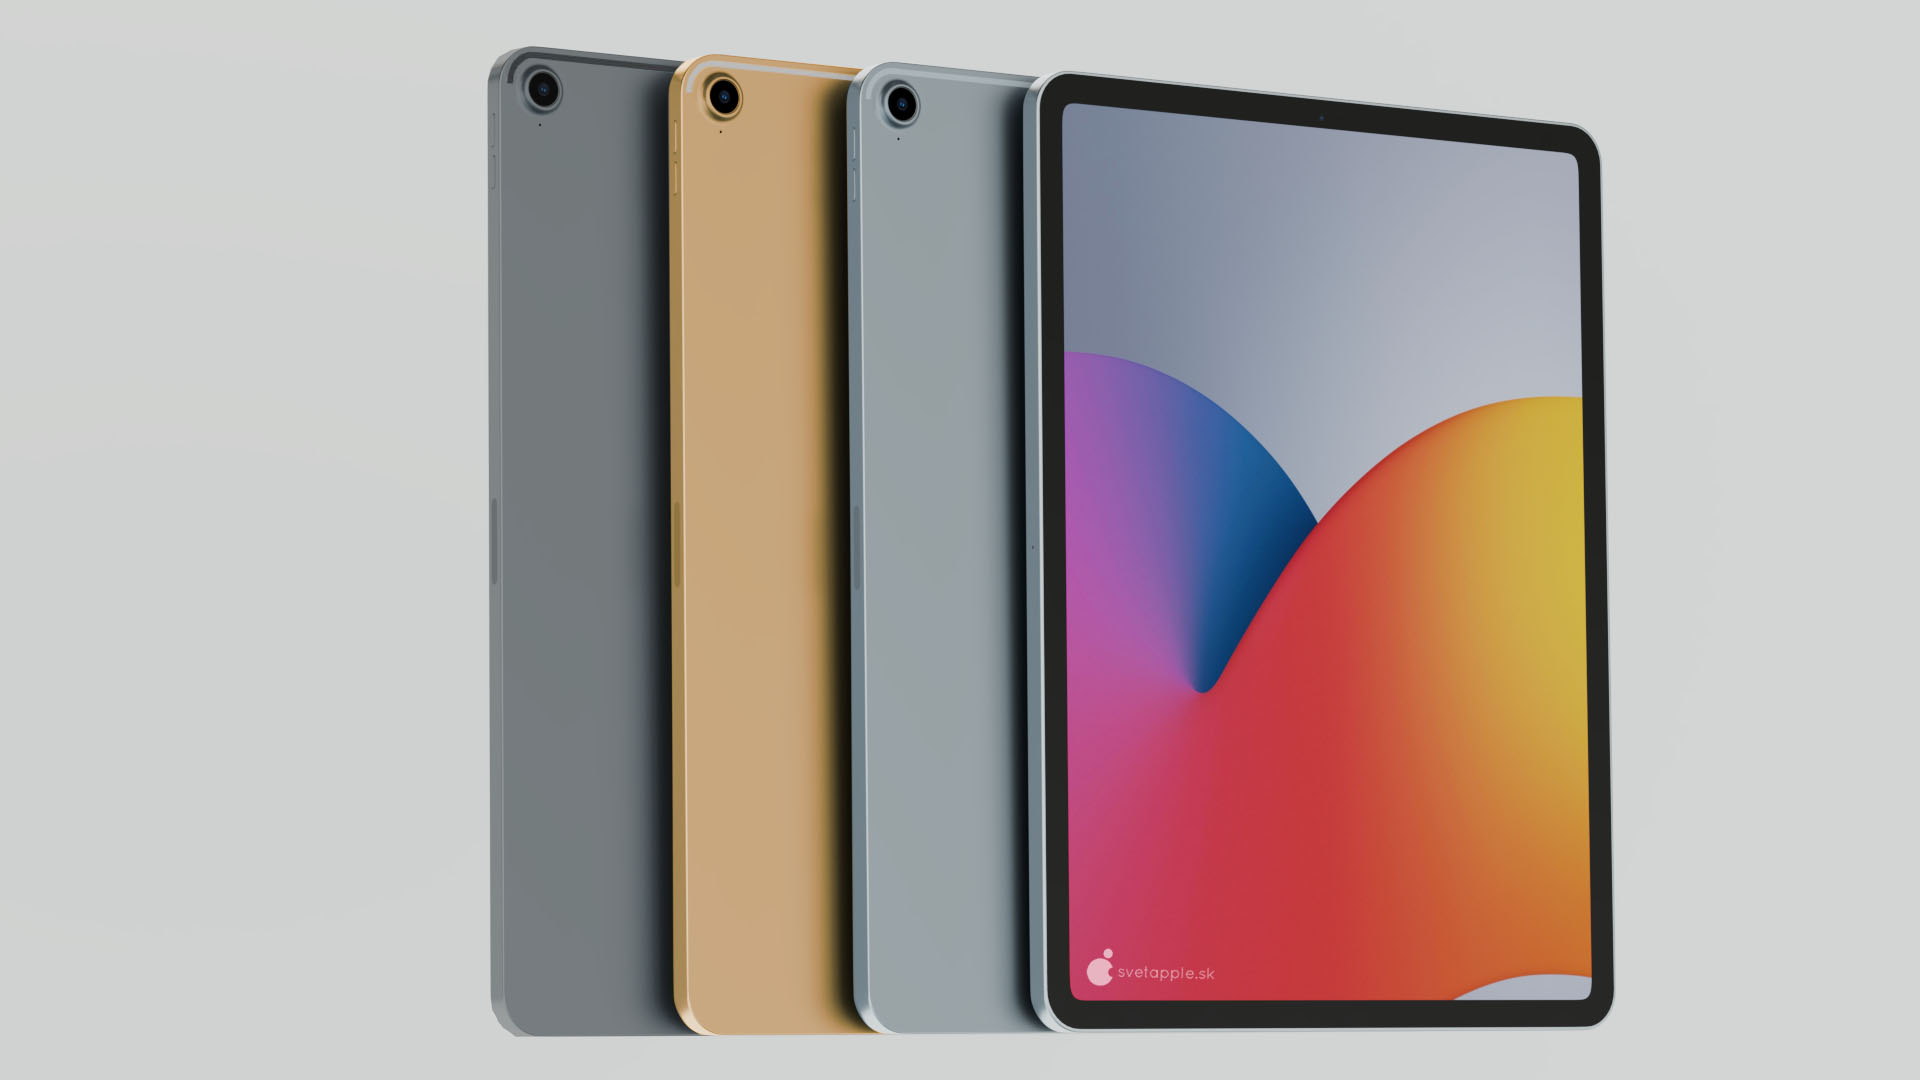 iPad Air 4: New renders show an updated tablet with a Touch ID